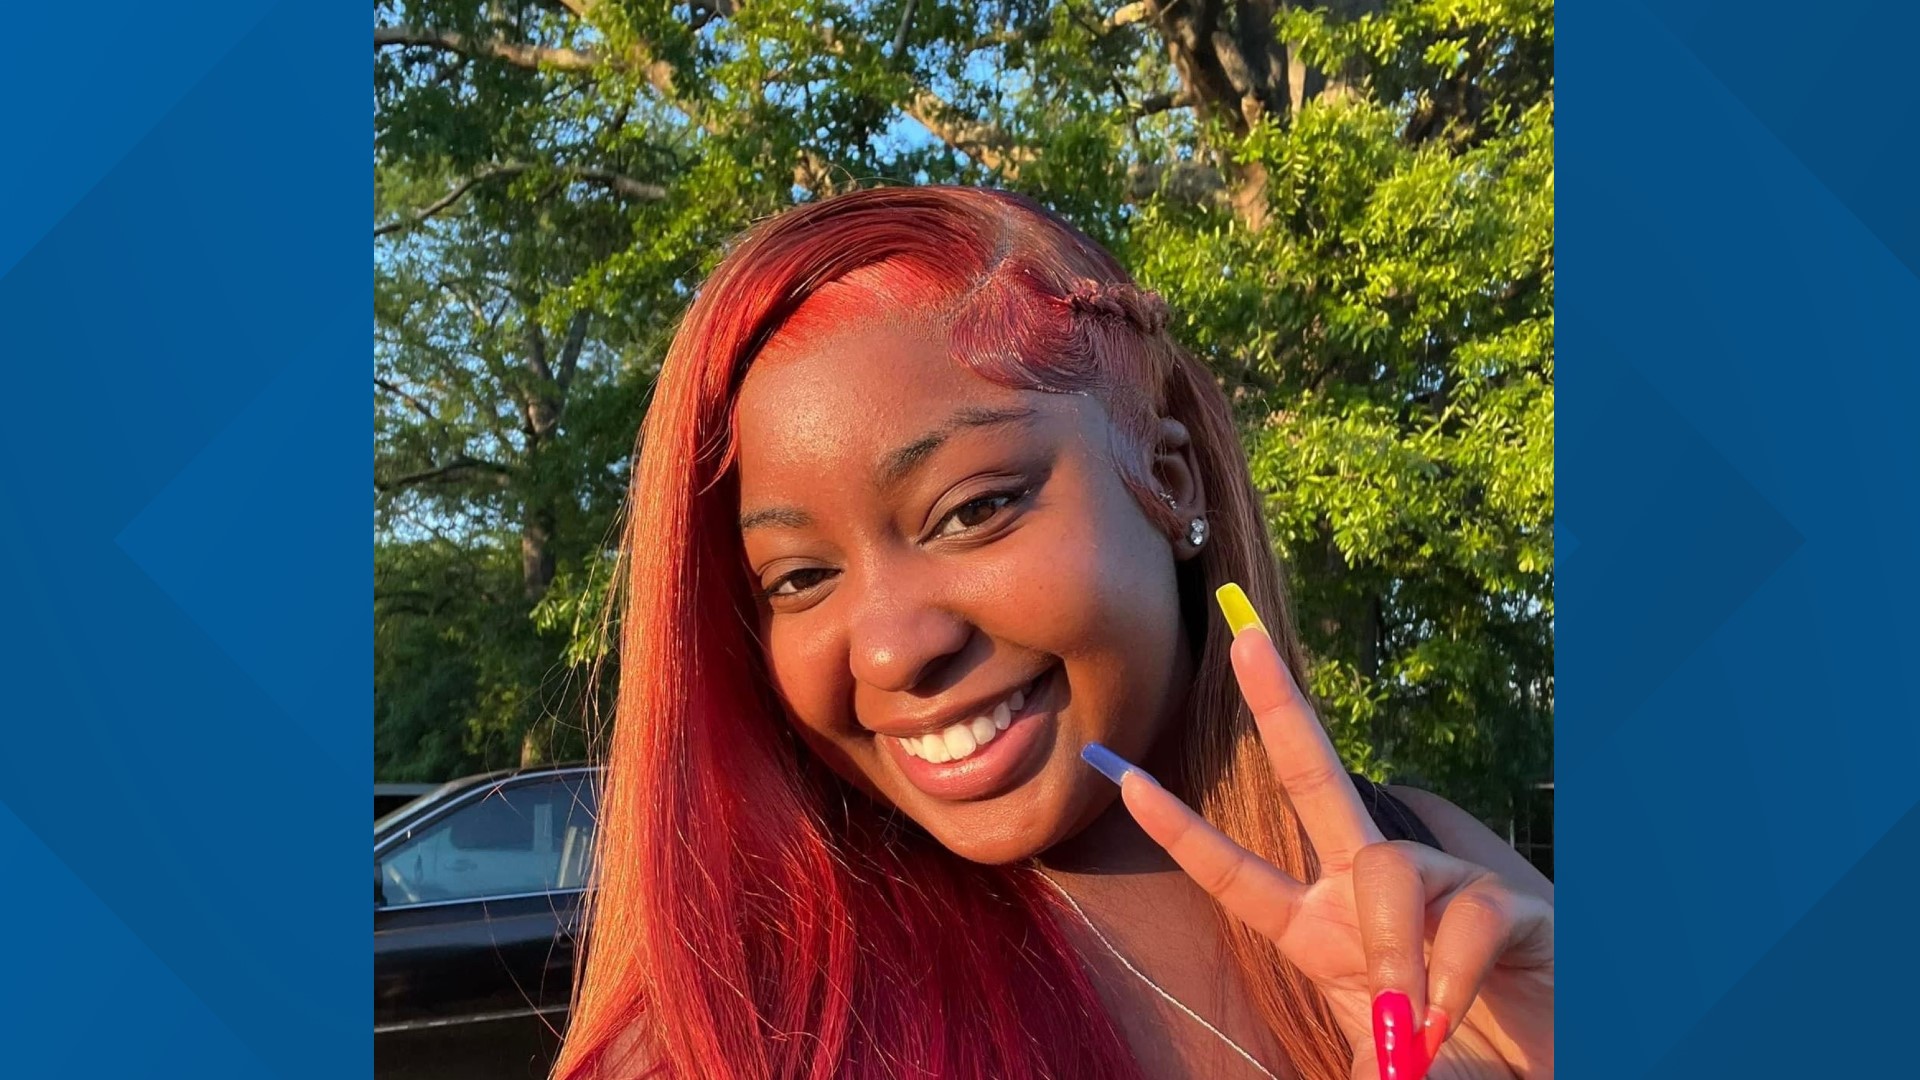 An arrest has been made in connection to the death of 22-year-old influencer Beauty Couch,  according to the Cobb County Police Department.